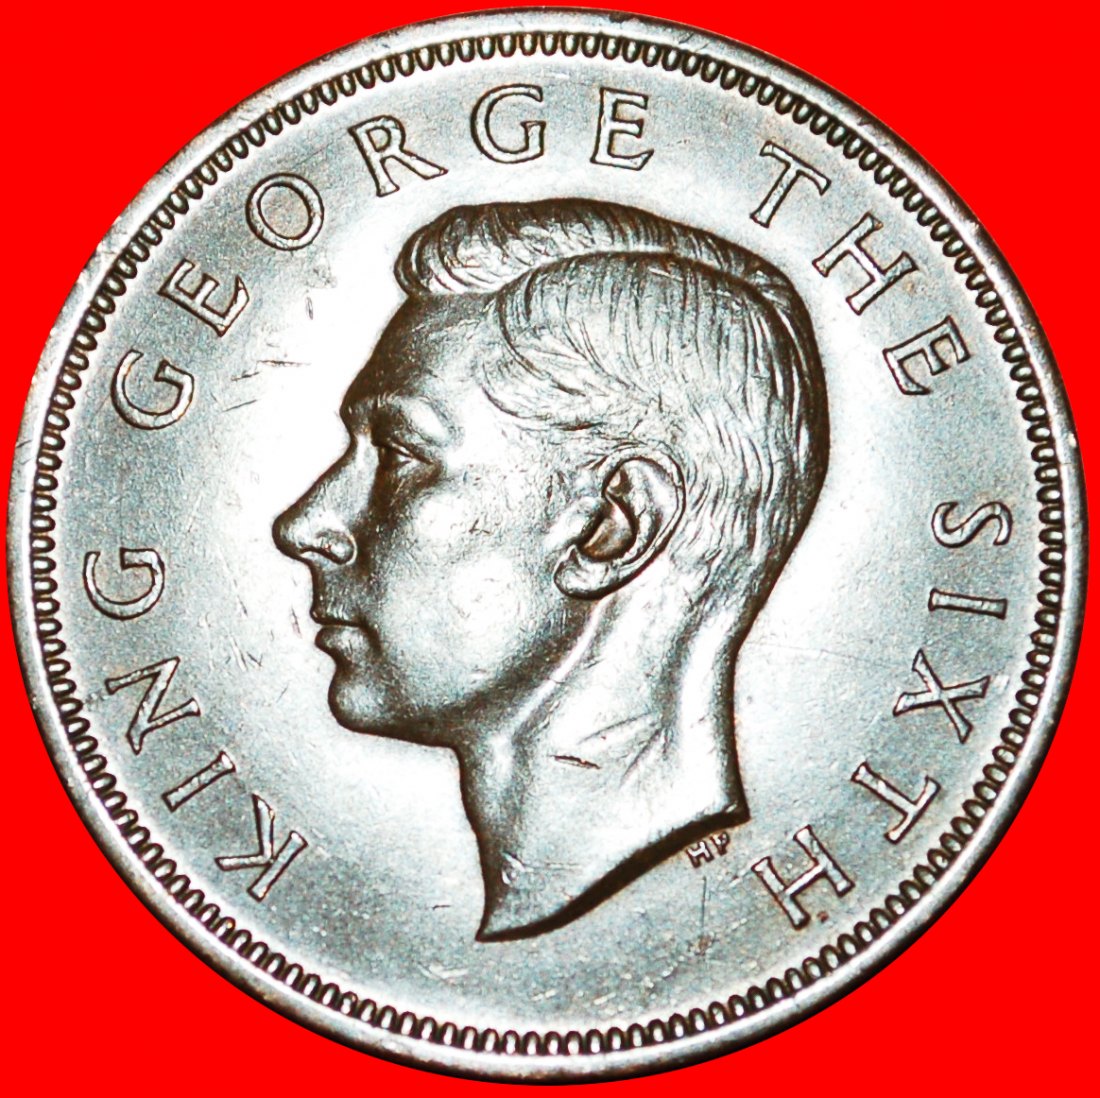  * GREAT BRITAIN (1940-1947): NEW ZEALAND ★ PENNY 1951! GEORGE VI (1937-1952) LOW START ★ NO RESERVE!   